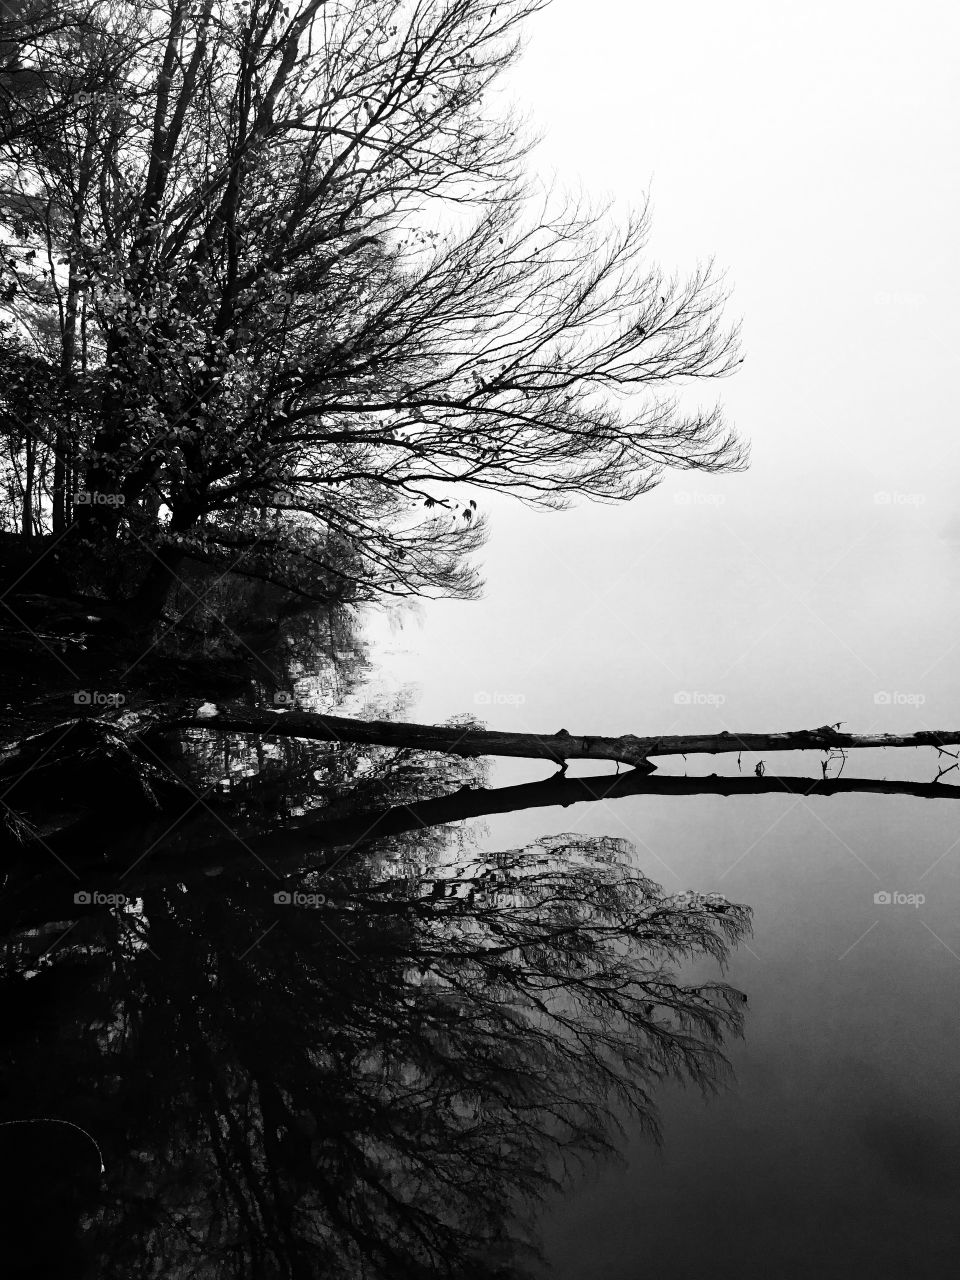 Black and white of an old tree log reaching out into the calm water on an eerie foggy morning at Lake Benson Park in Garner North Carolina, Raleigh Triangle area, Wake County. Crystal clear reflections of log and trees on water’s surface. 